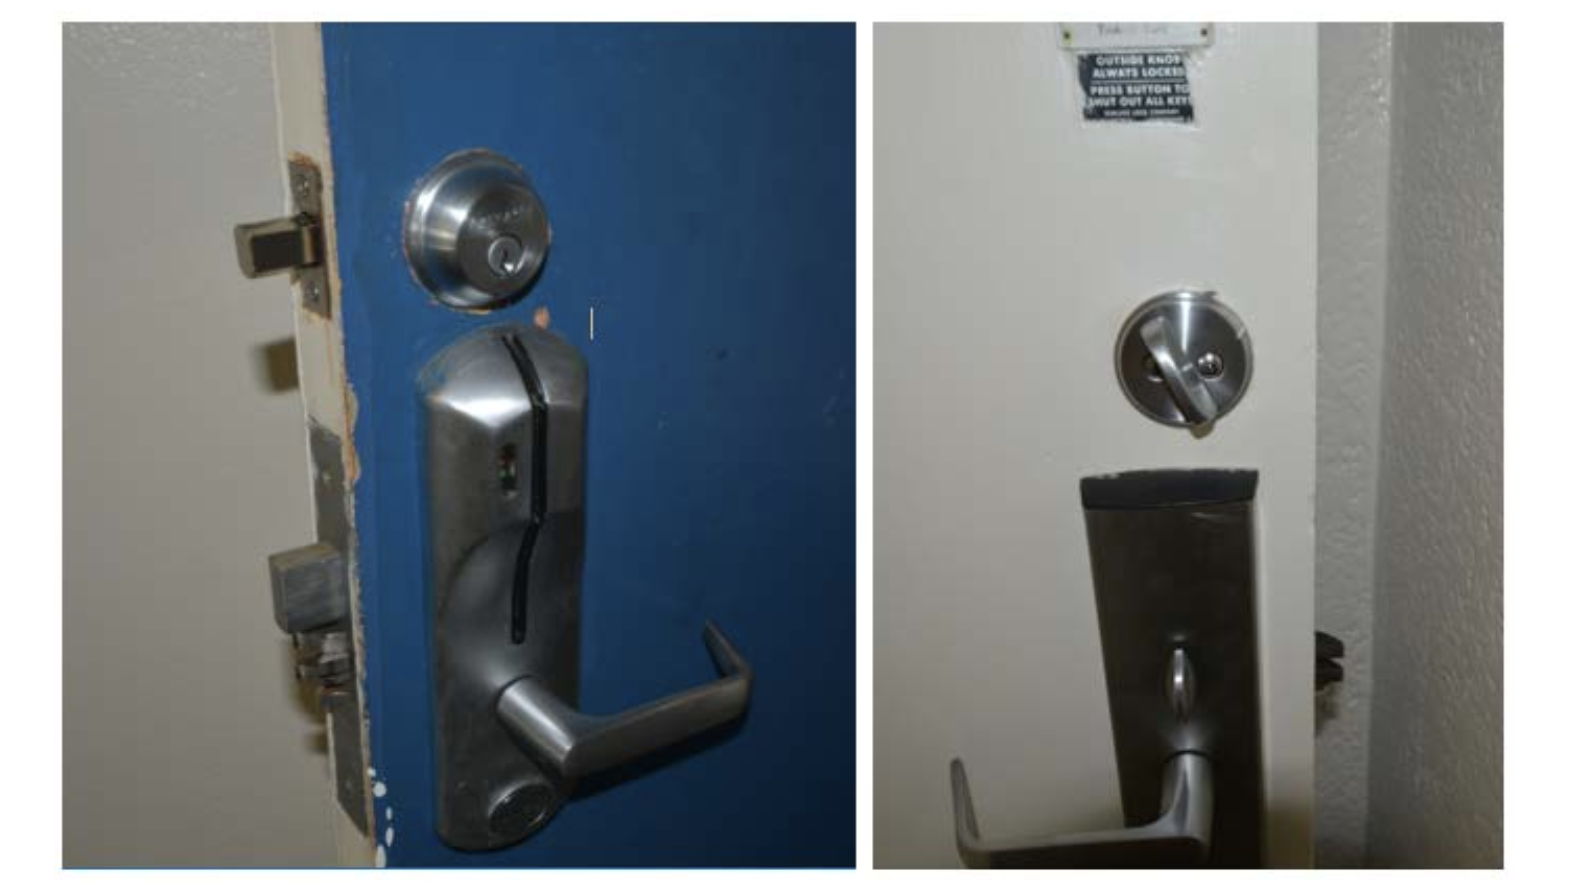 Two images of door handles and locks on different colored doors, one blue, one white, with visible latches and strike plates.